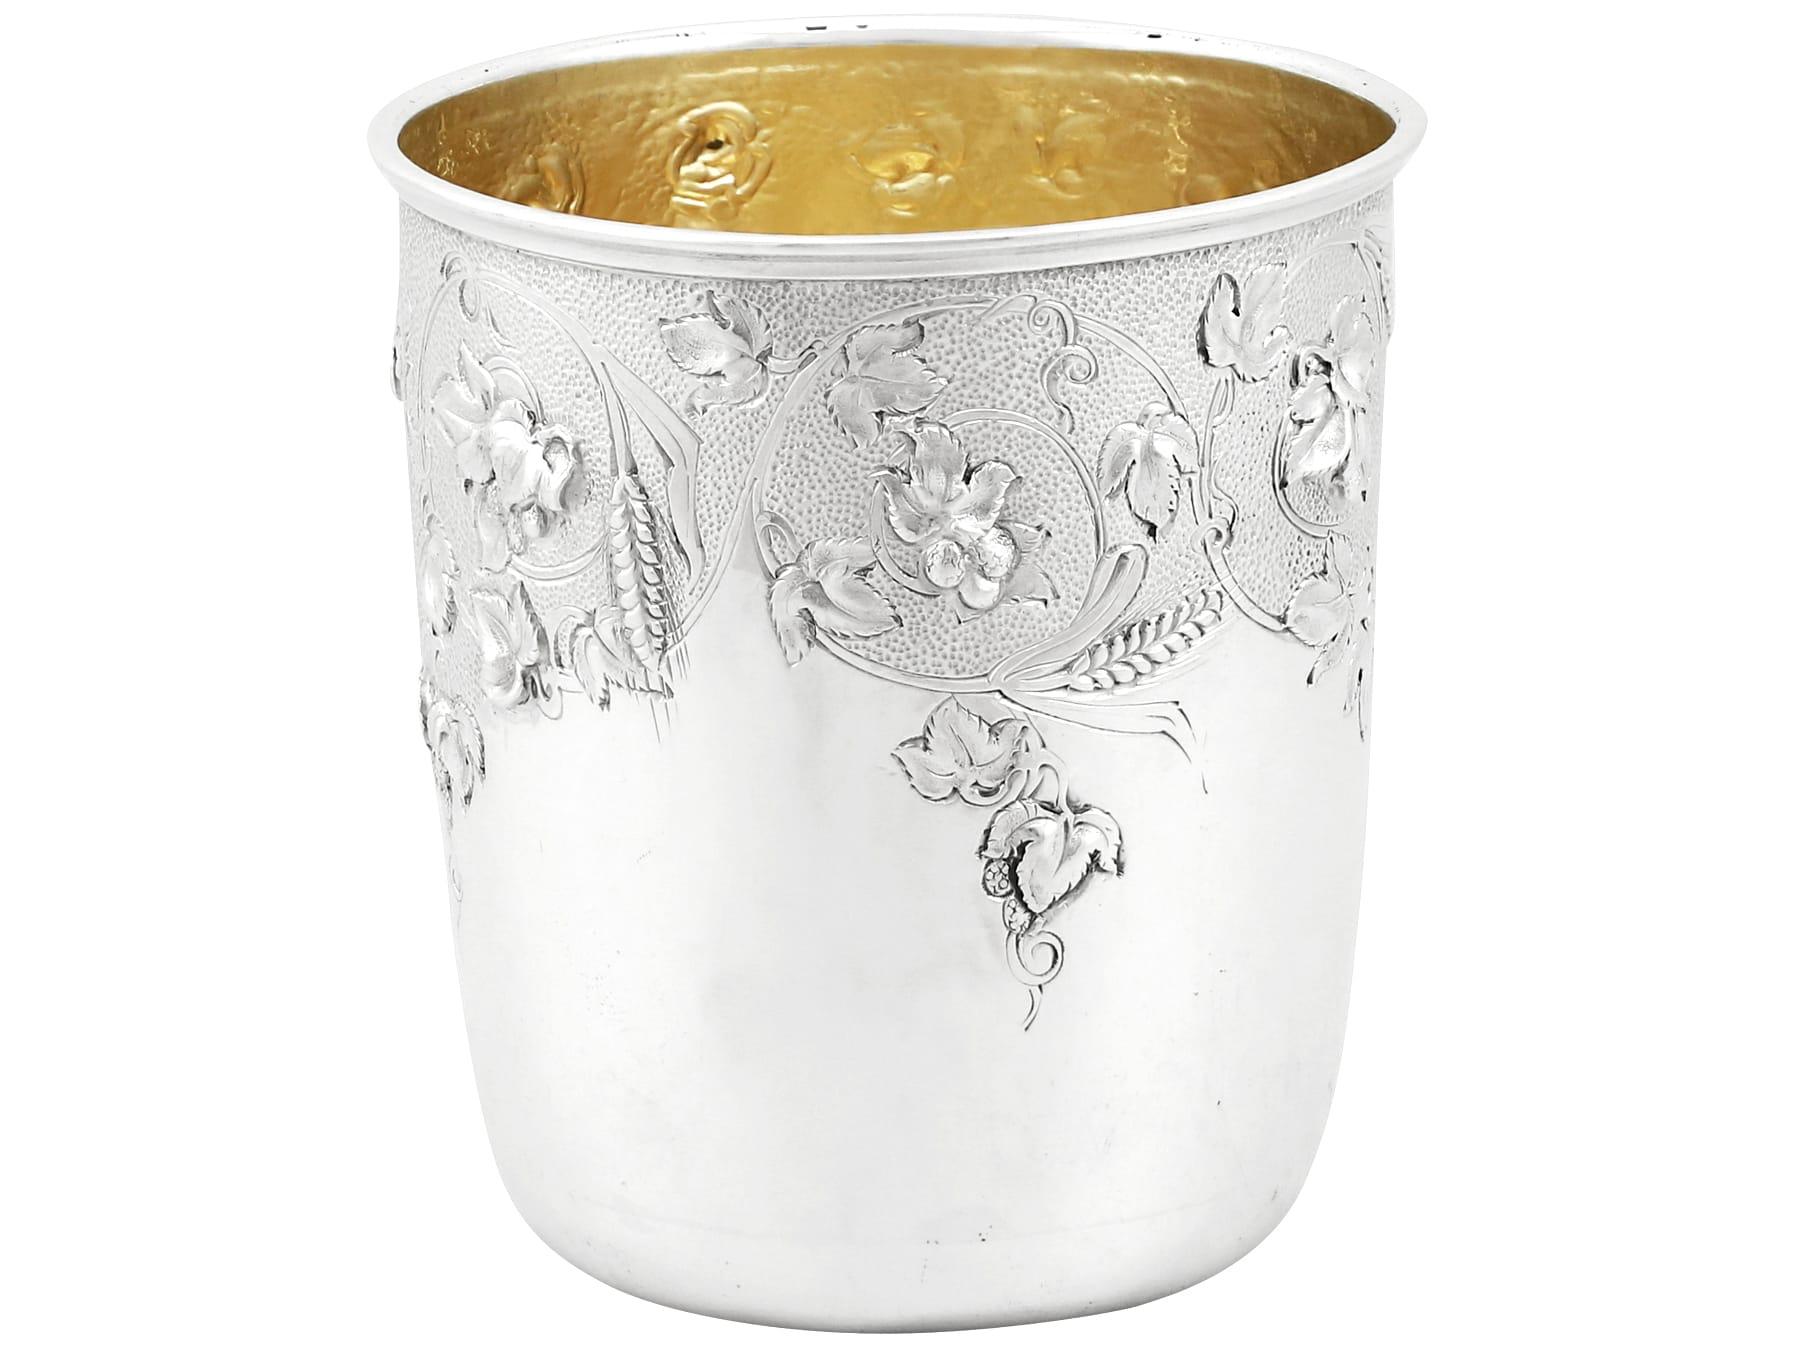 An exceptional, fine and impressive antique Victorian Scottish sterling silver beaker; an addition to our ornamental silverware collection

This exceptional antique Victorian Scottish sterling silver beaker has a cylindrical, rounded form.

The